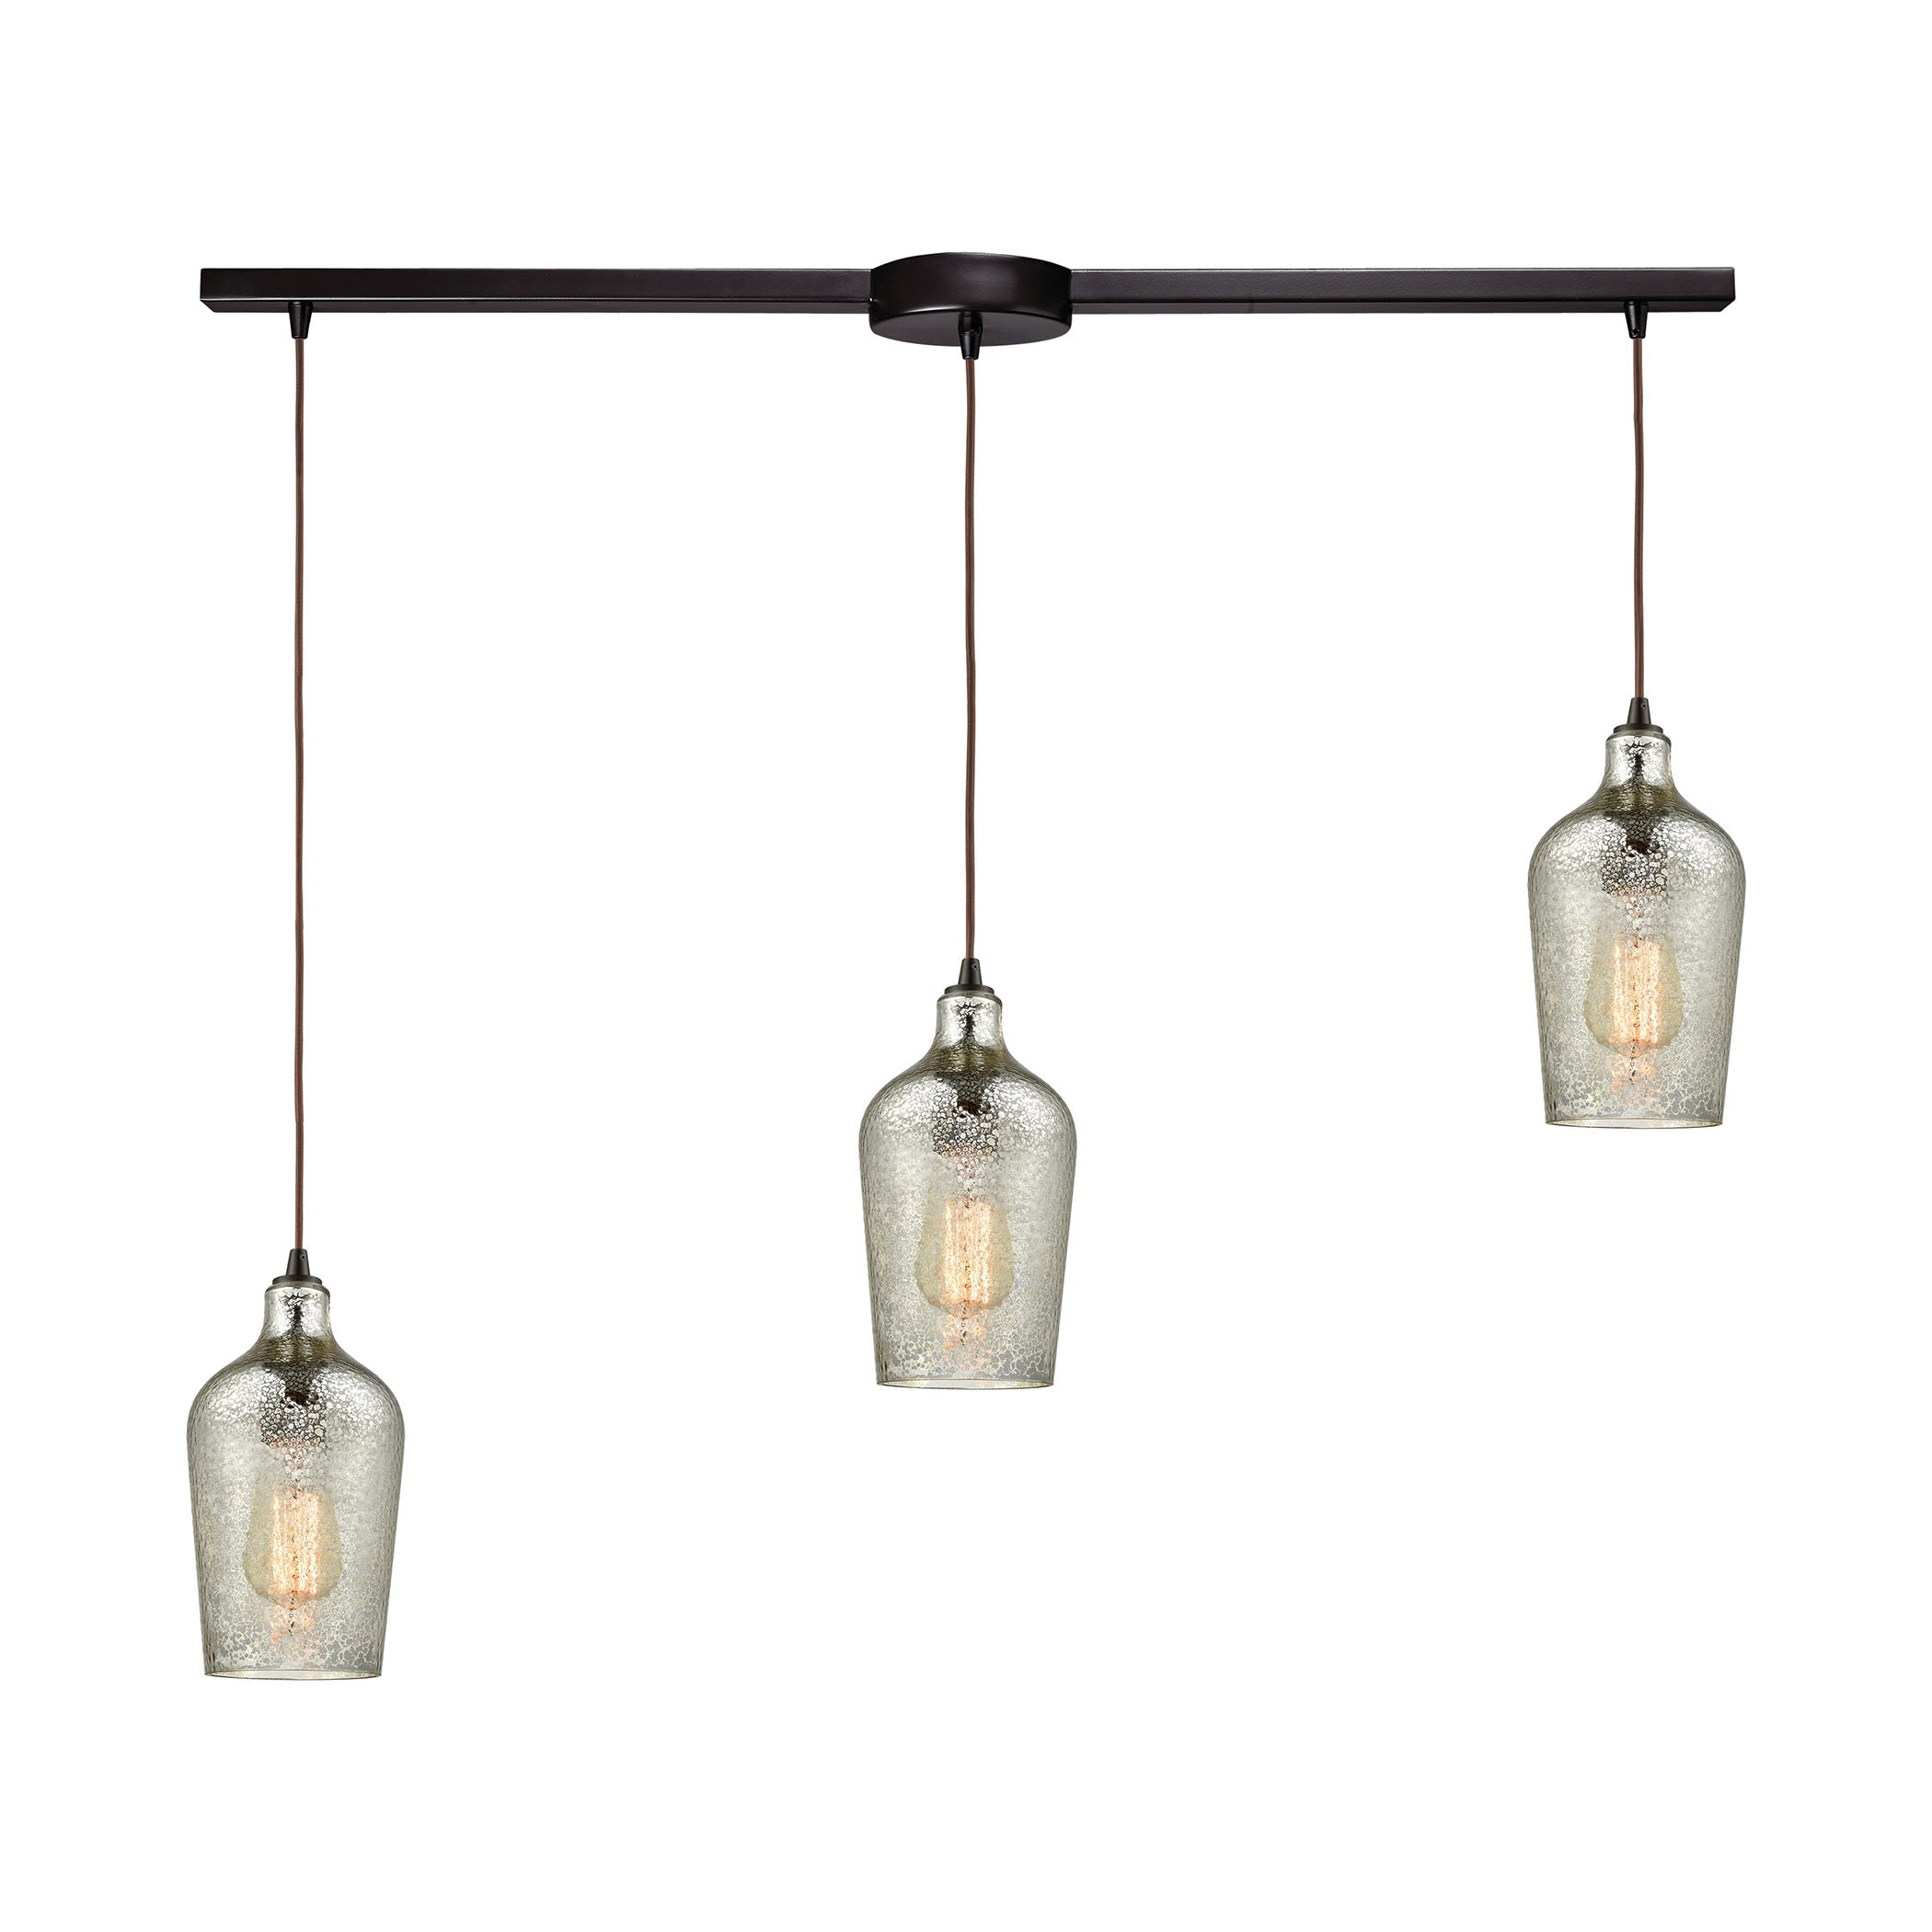 ELK Lighting 10830/3L Hammered Glass 3-Light Linear Mini Pendant Fixture in Oiled Bronze with Hammered Mercury Glass